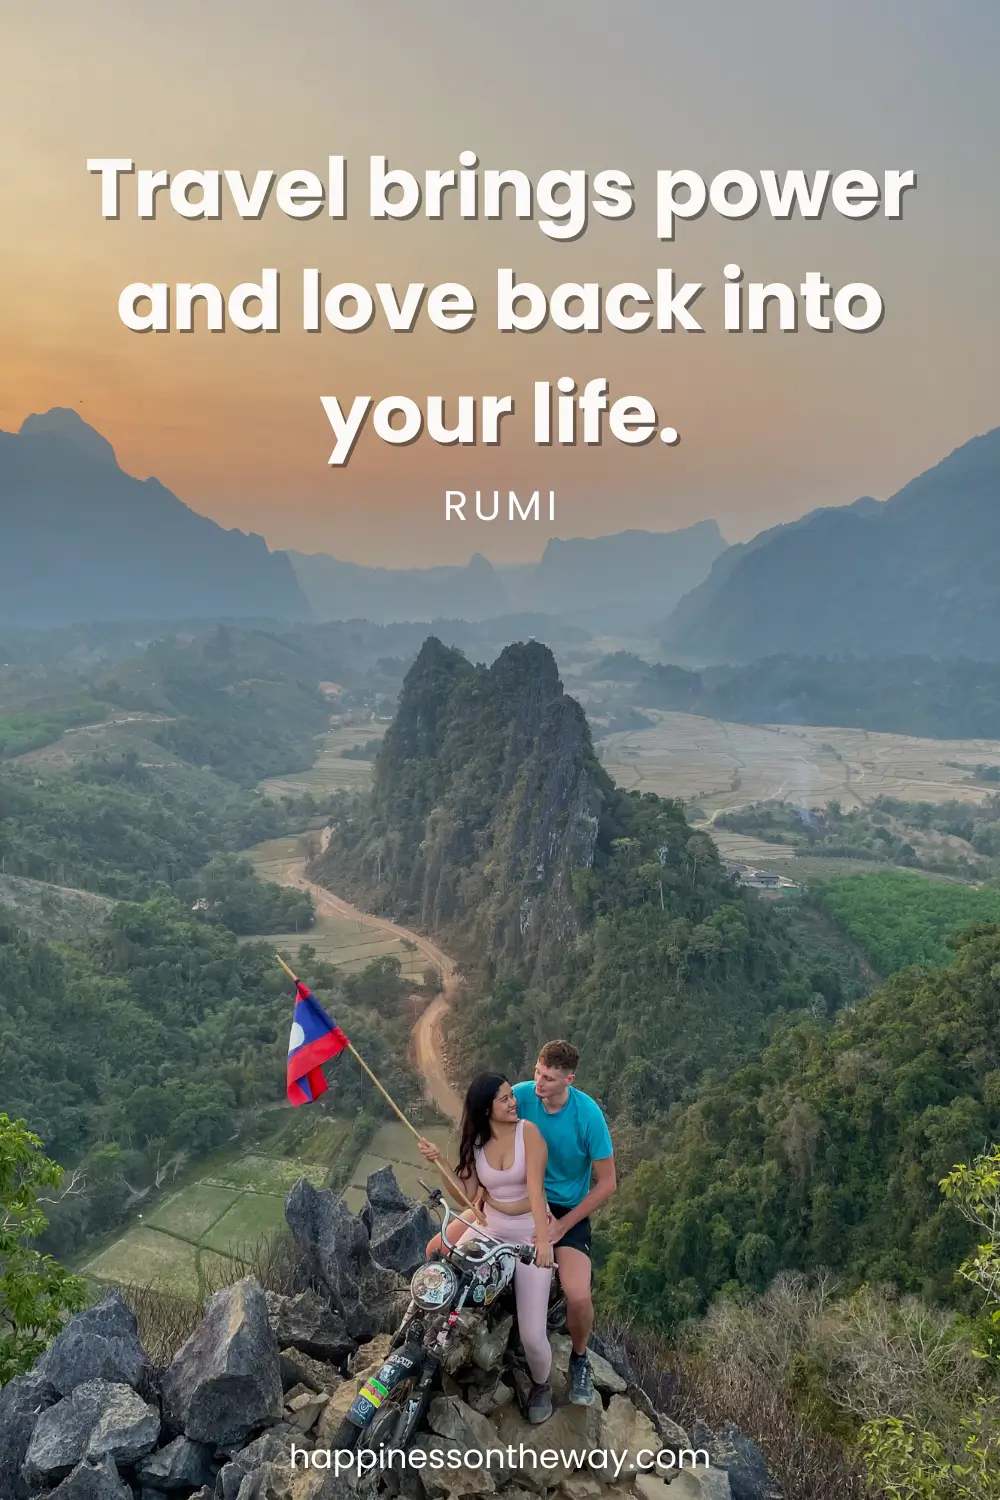 An intimate moment atop a mountain at dusk with me and my partner seated close to each other, holding a Laotian flag, overlooking a valley, encapsulating the essence of Rumi's slow travel quote 'Travel brings power and love back into your life.